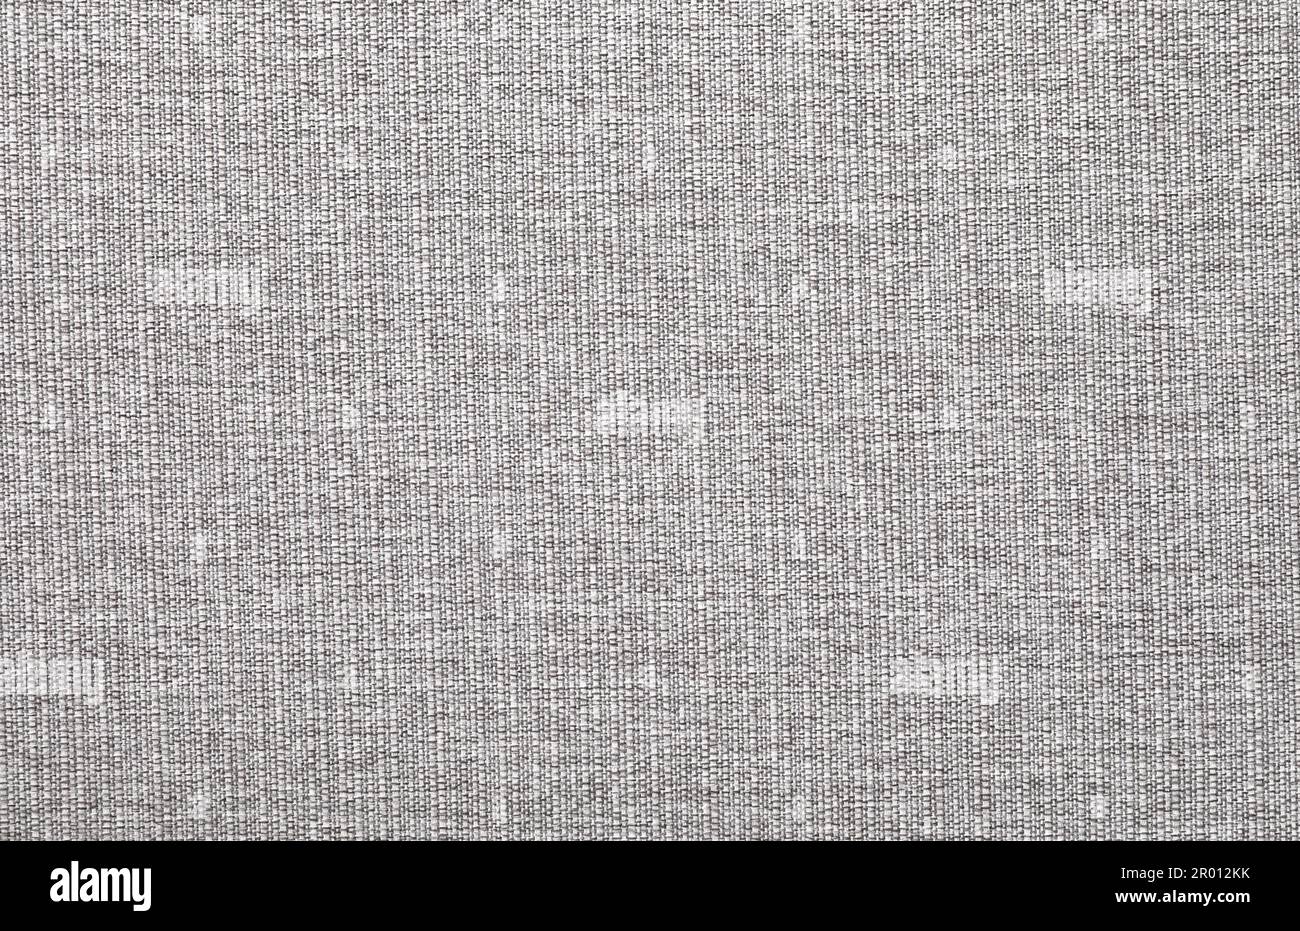 Close-up texture of natural gray fabric or cloth in black color. Fabric  texture of natural cotton or linen textile material. Gray or black canvas  background. Stock Photo